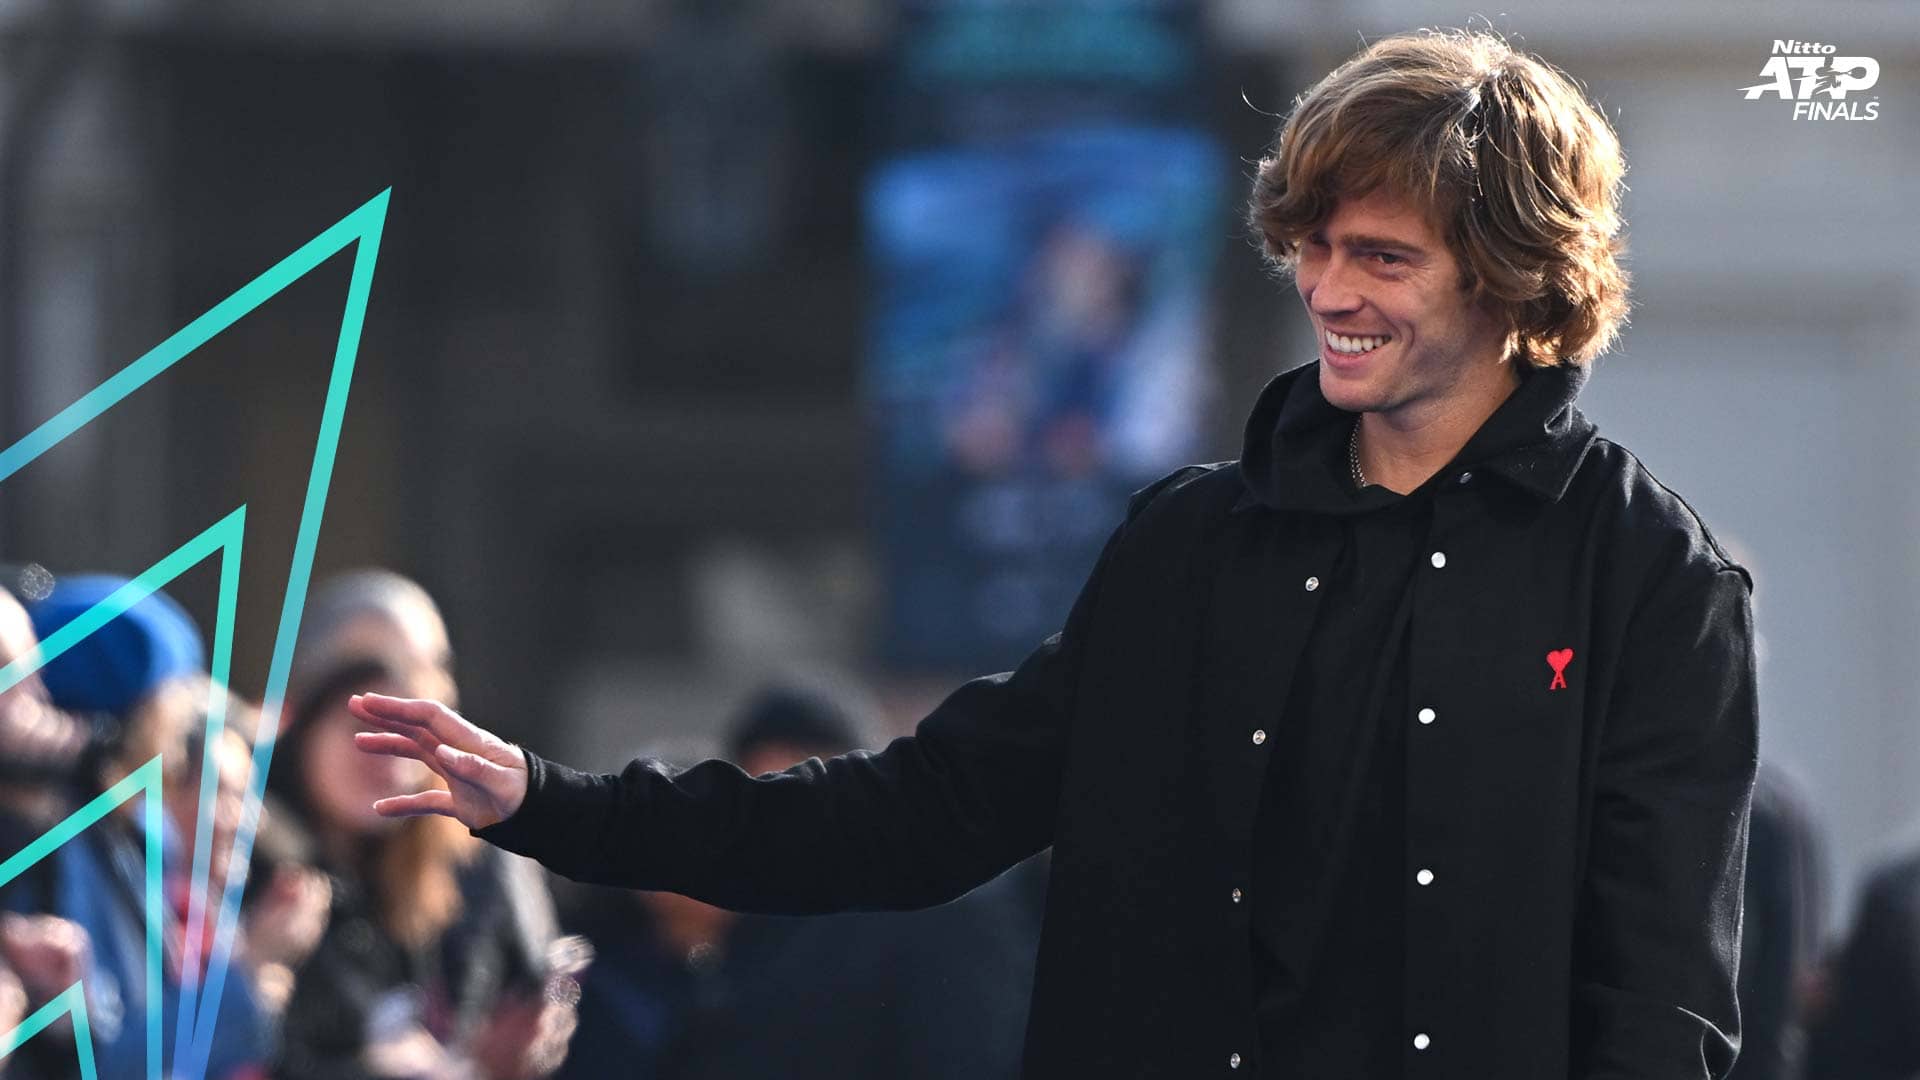 Andrey Rublev waves to fans on Turin's Piazza San Carlo.